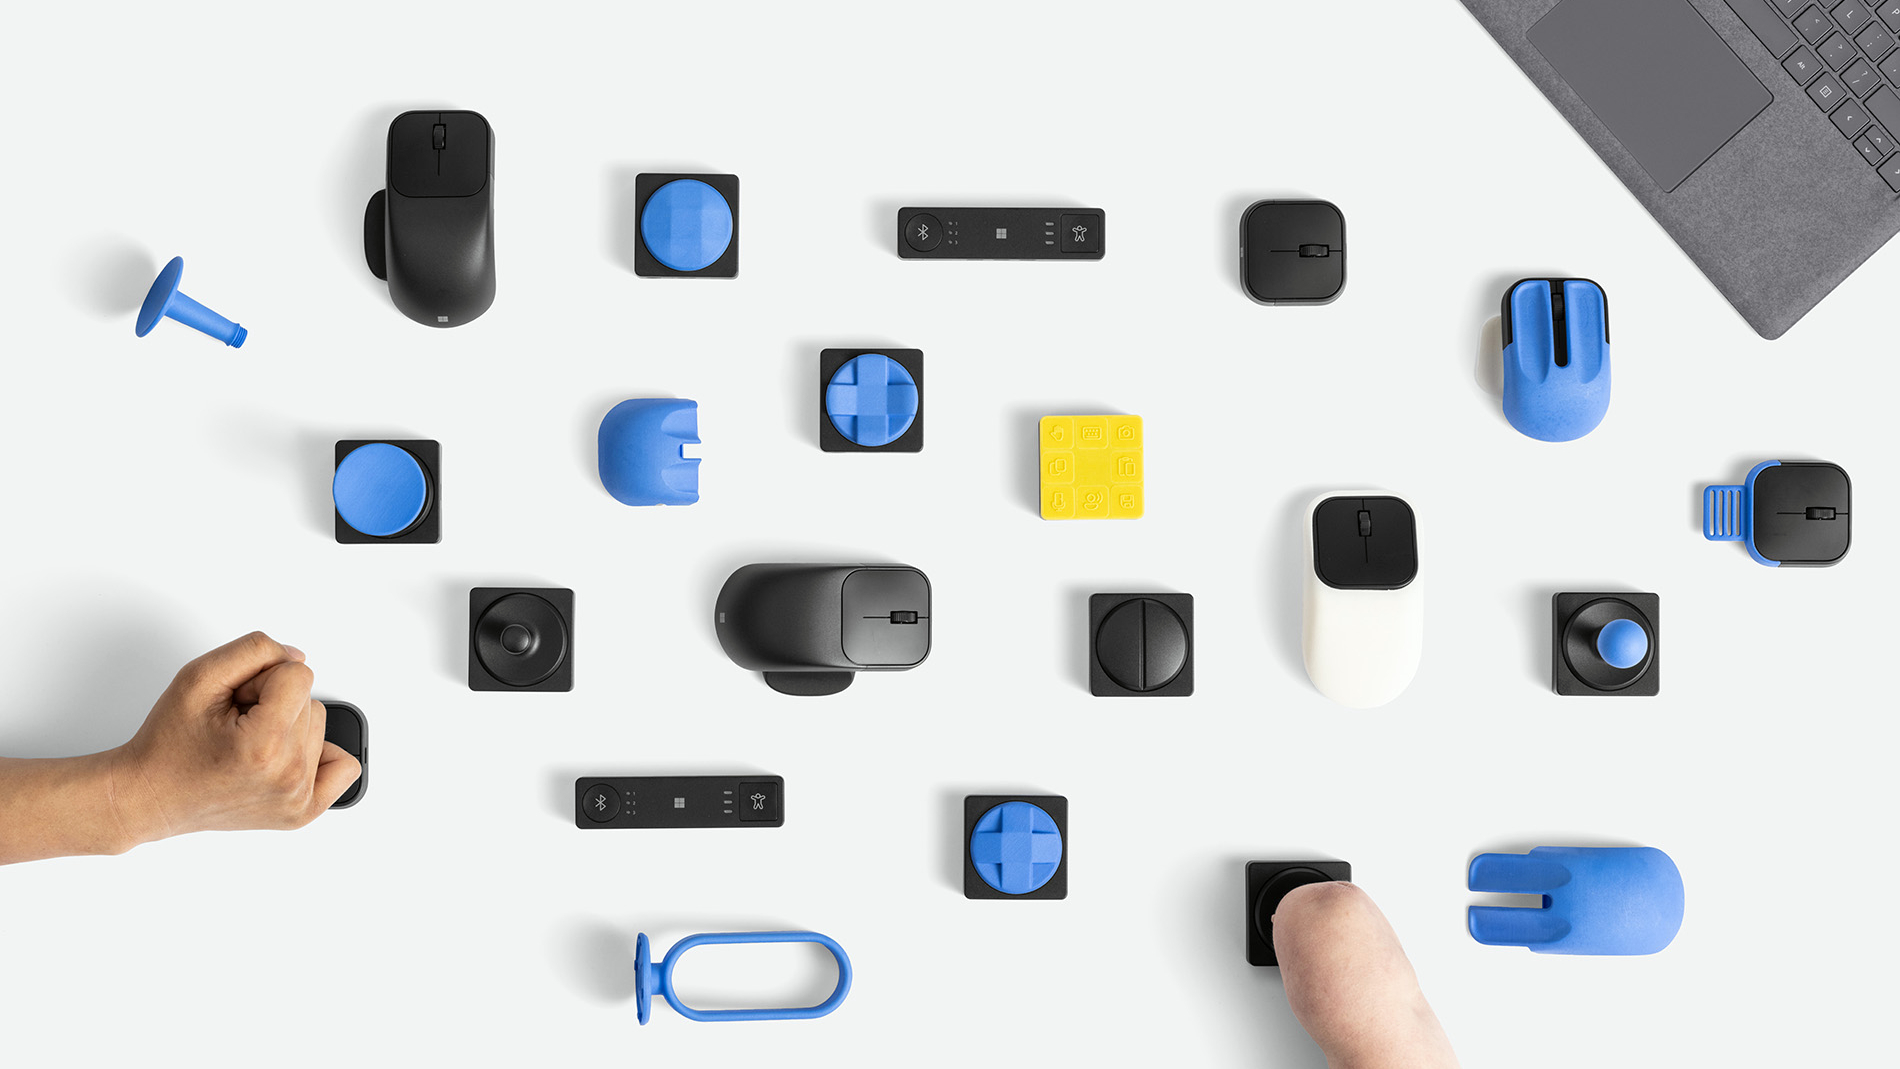 Promotional image for Microsoft Adaptive Accessories